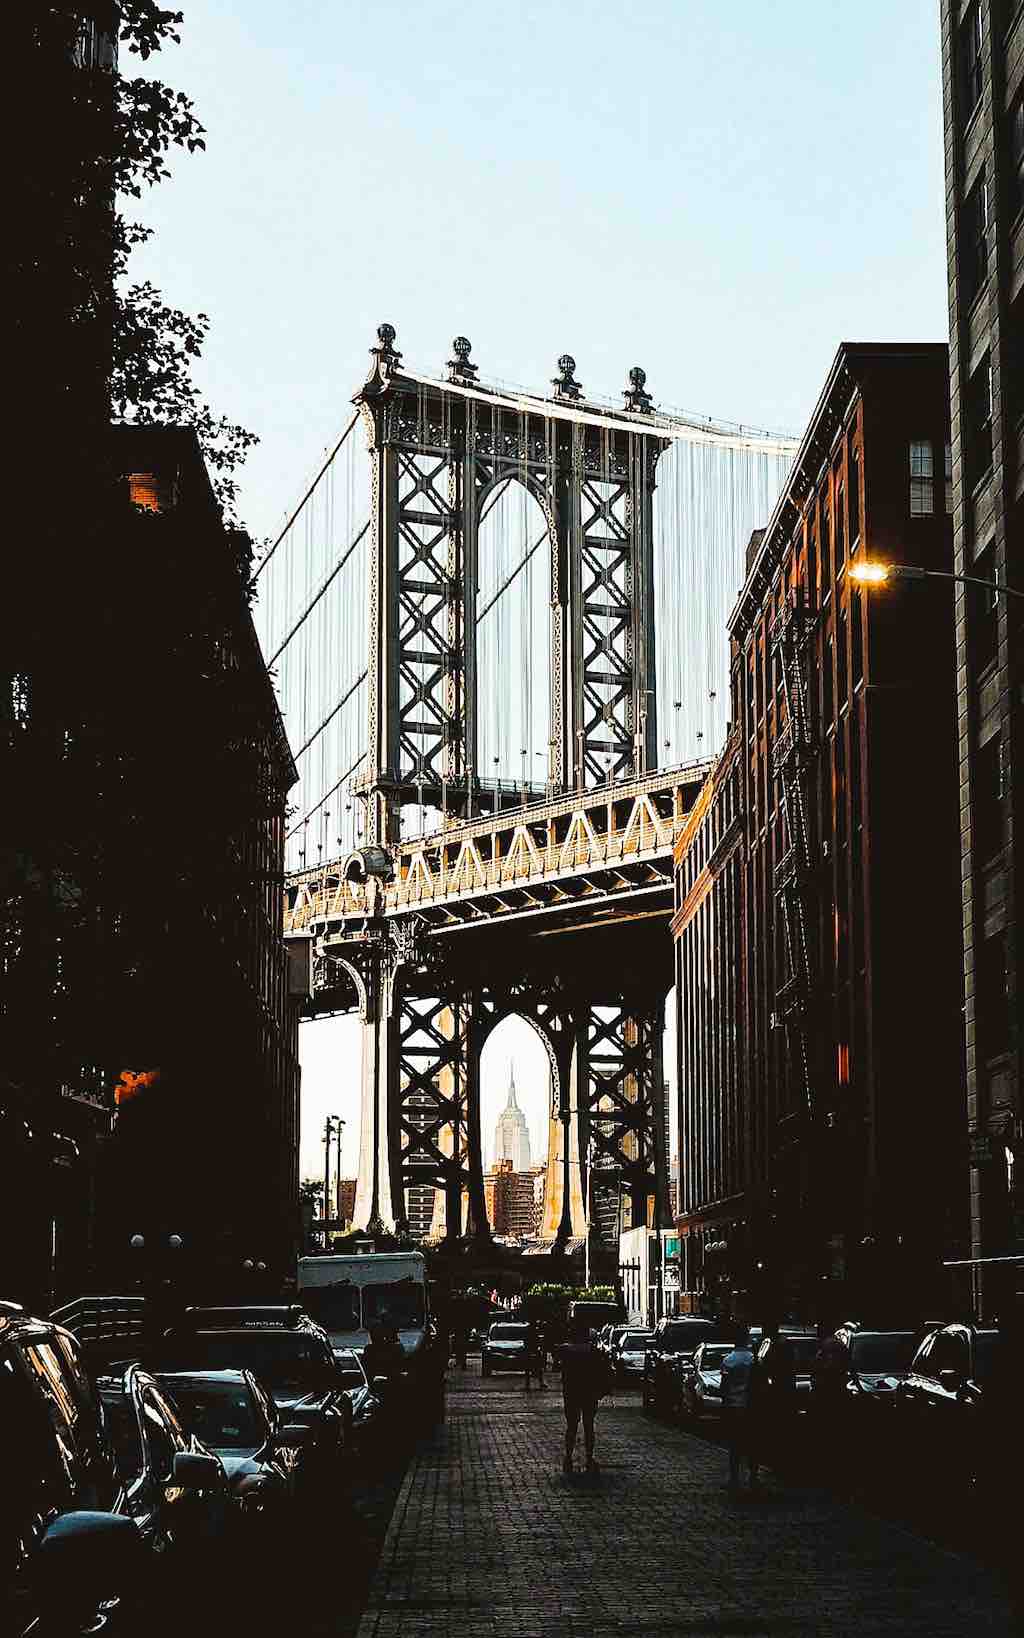 A view of DUMBO (Down Under the Manhattan Bridge Overpass). You can see the Manhattan Bridge framing the Empire State Building in New York City